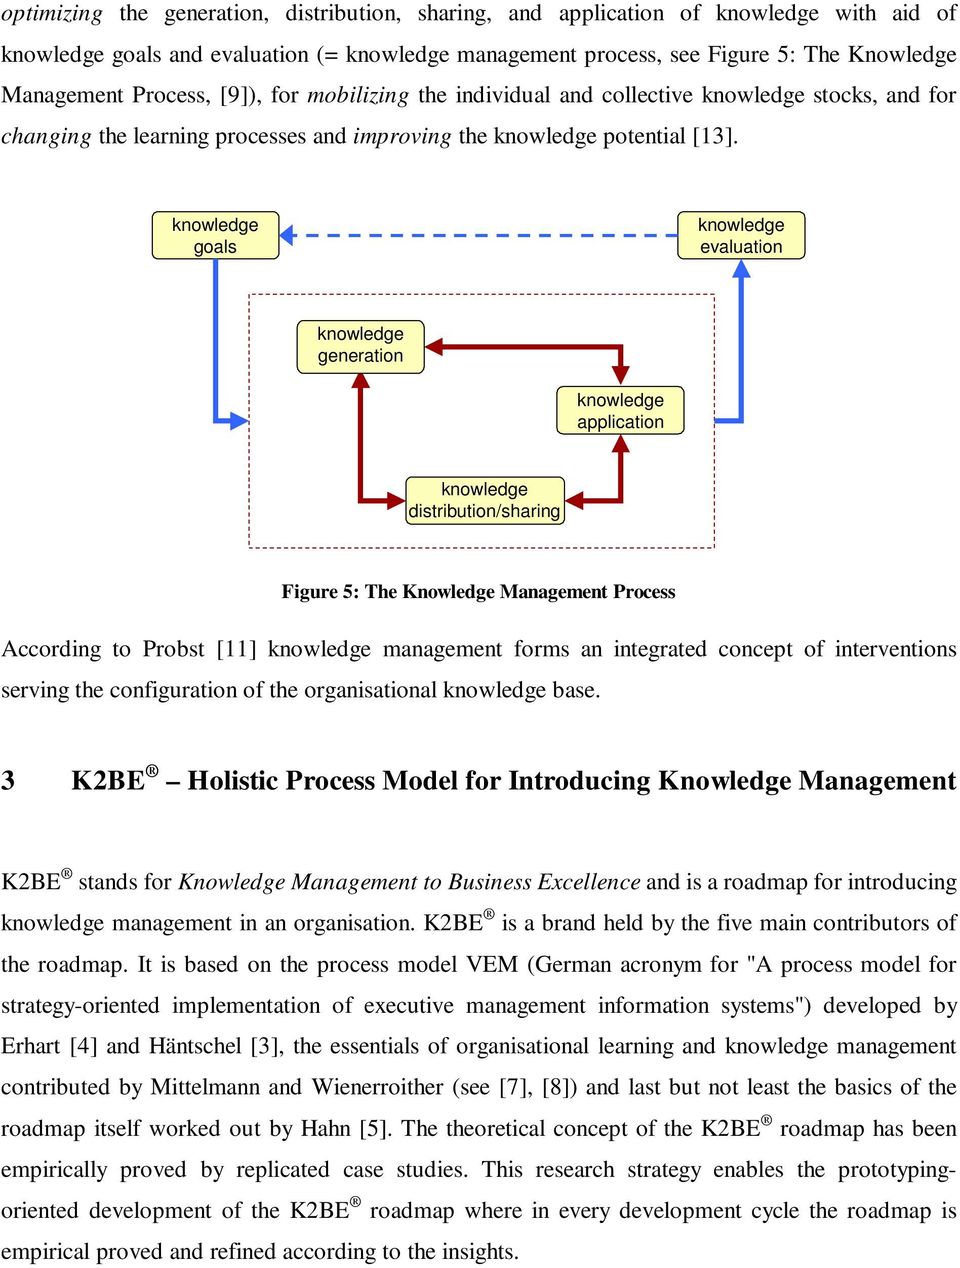 goals evaluation generation application distribution/sharing Figure 5: The Knowledge Management Process According to Probst [11] management forms an integrated concept of interventions serving the